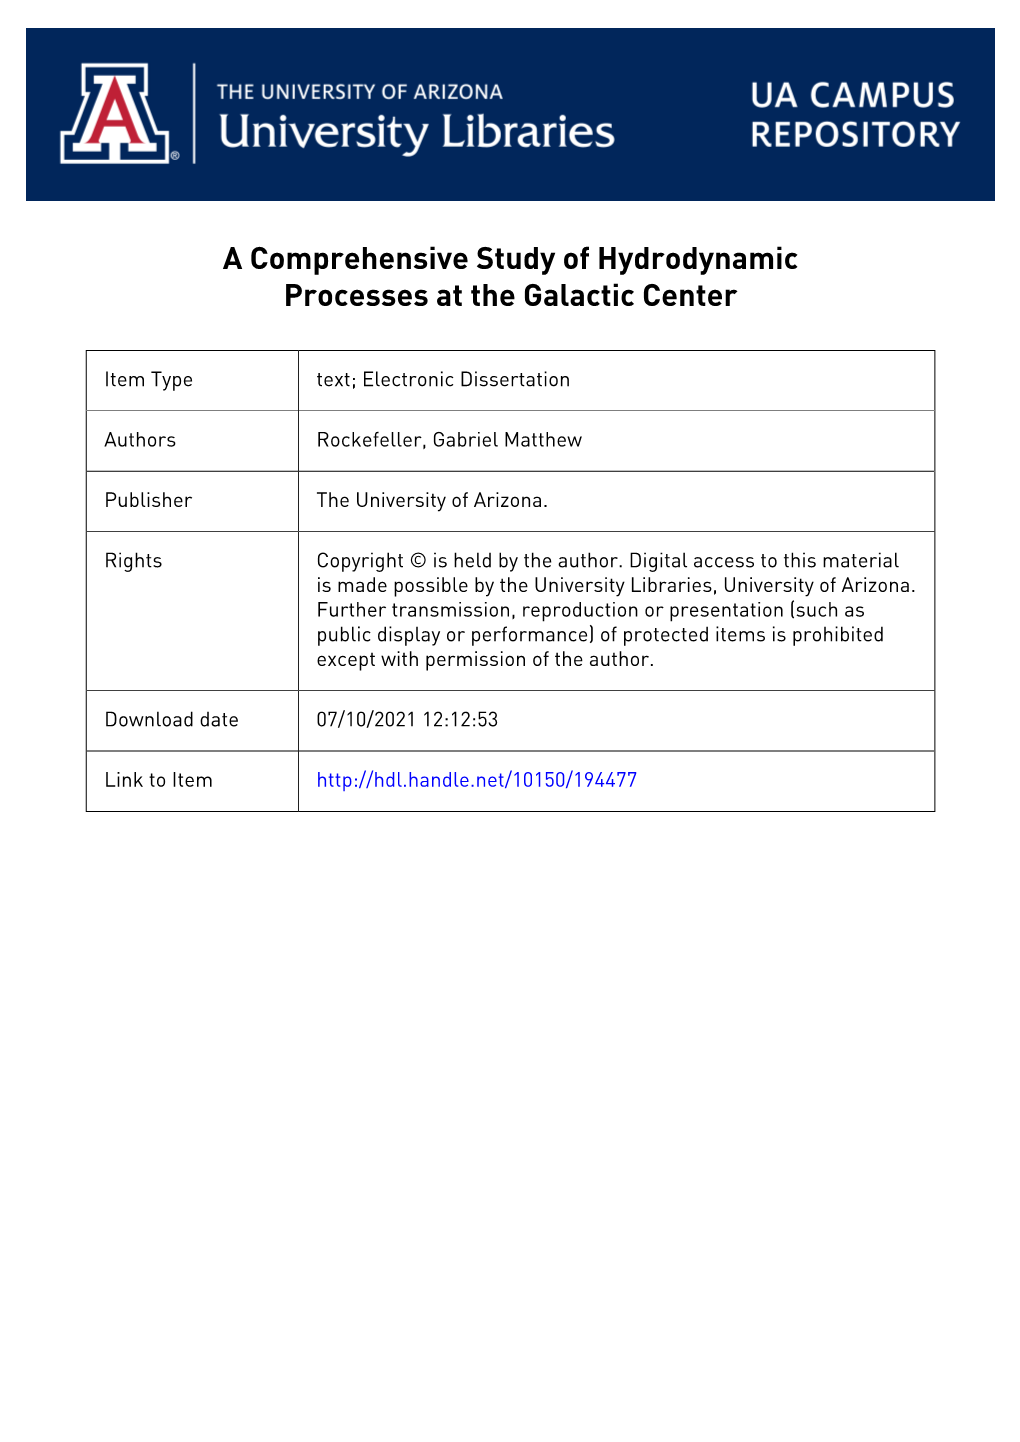 A COMPREHENSIVE STUDY of HYDRODYNAMIC PROCESSES at the GALACTIC CENTER by Gabriel Matthew Rockefeller a Dissertation Submitted T